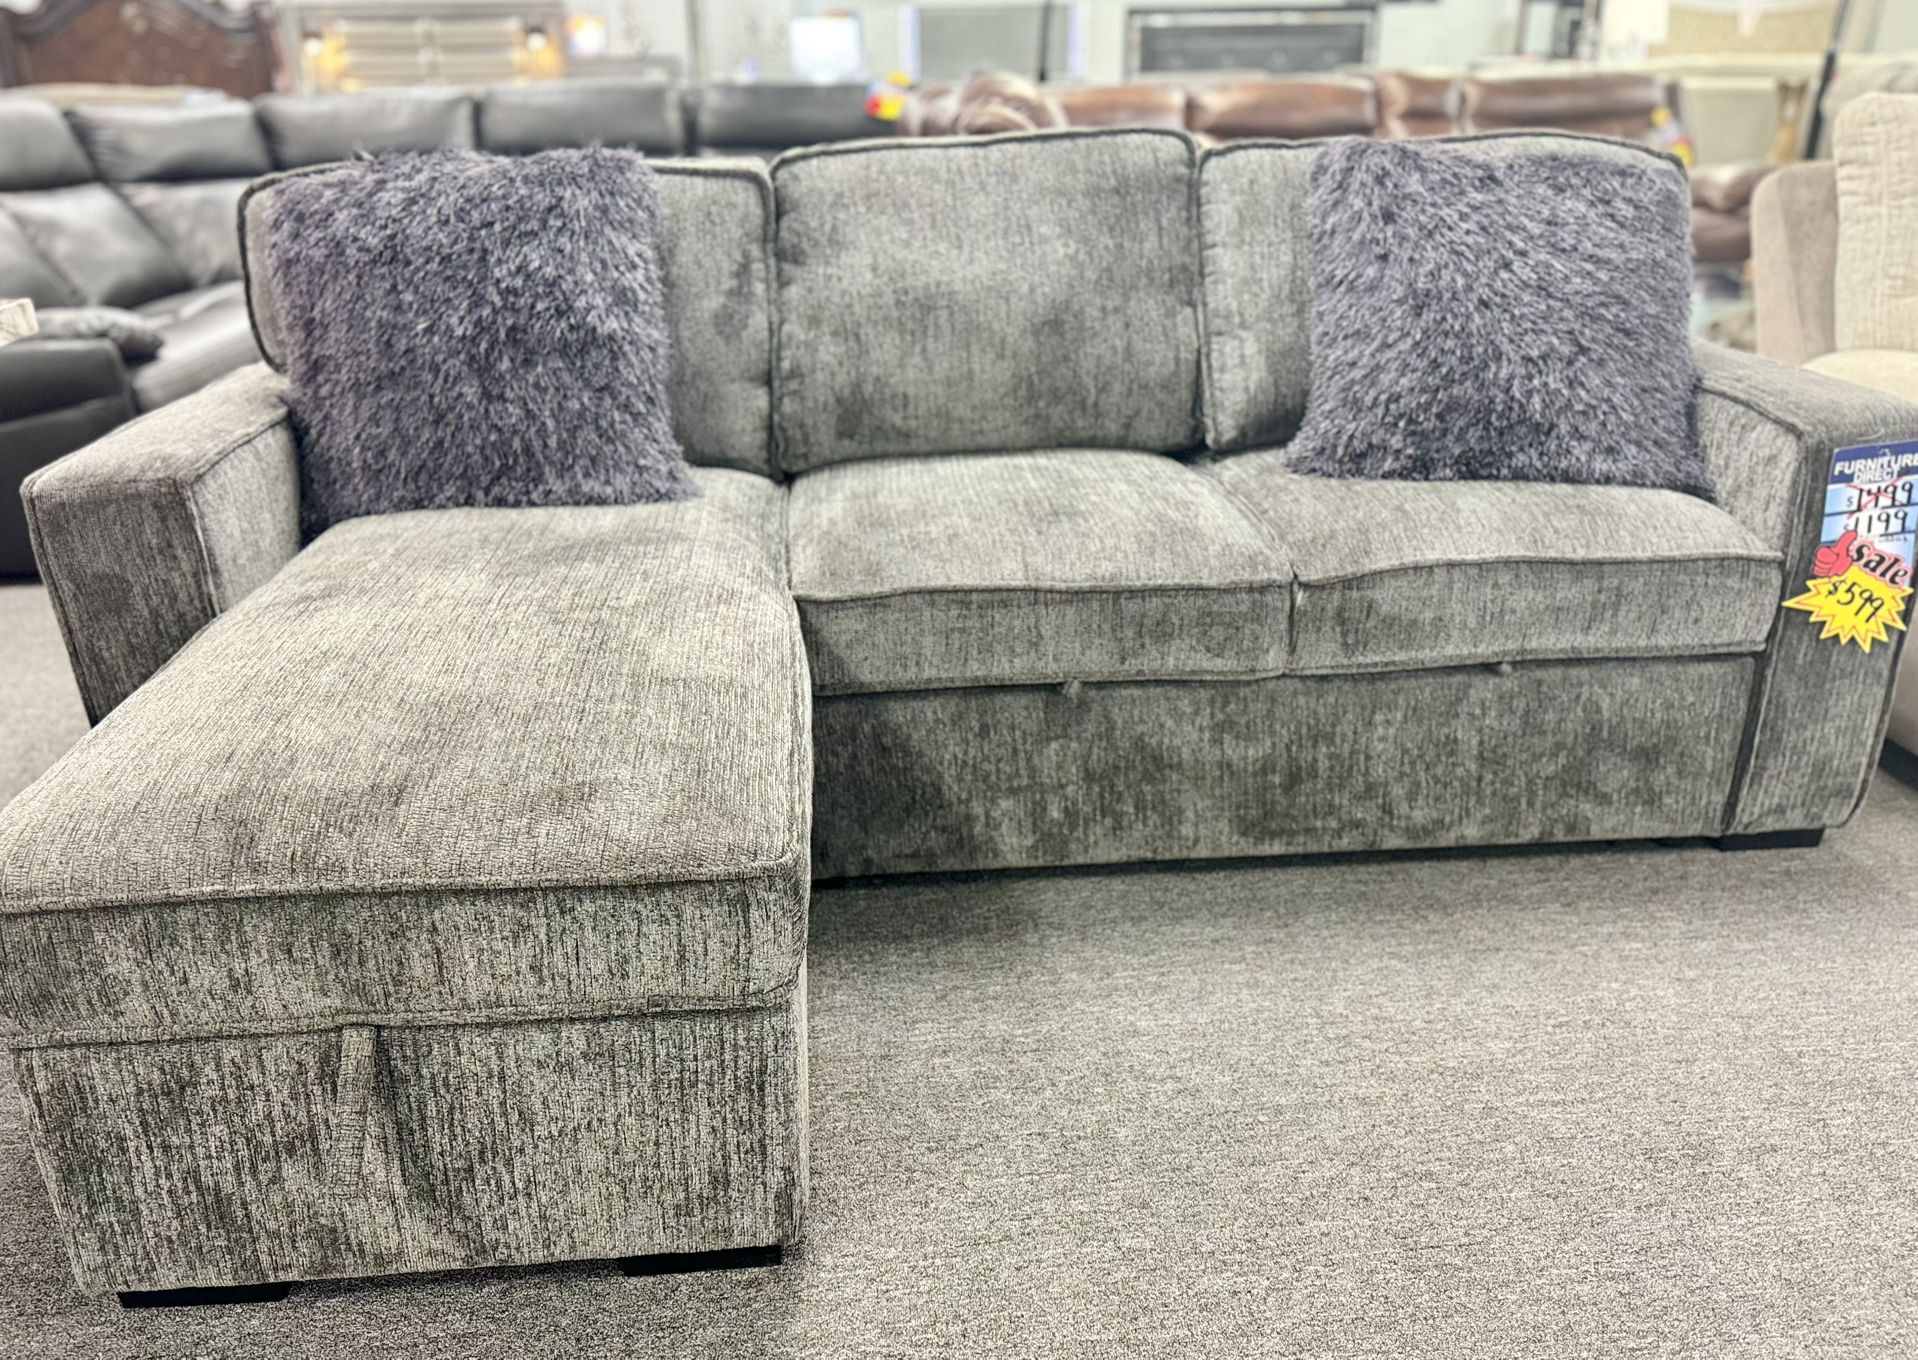 Stunning Grey Pull Out Sleeper Sofa Sectional Available Crazy Deal Only $599